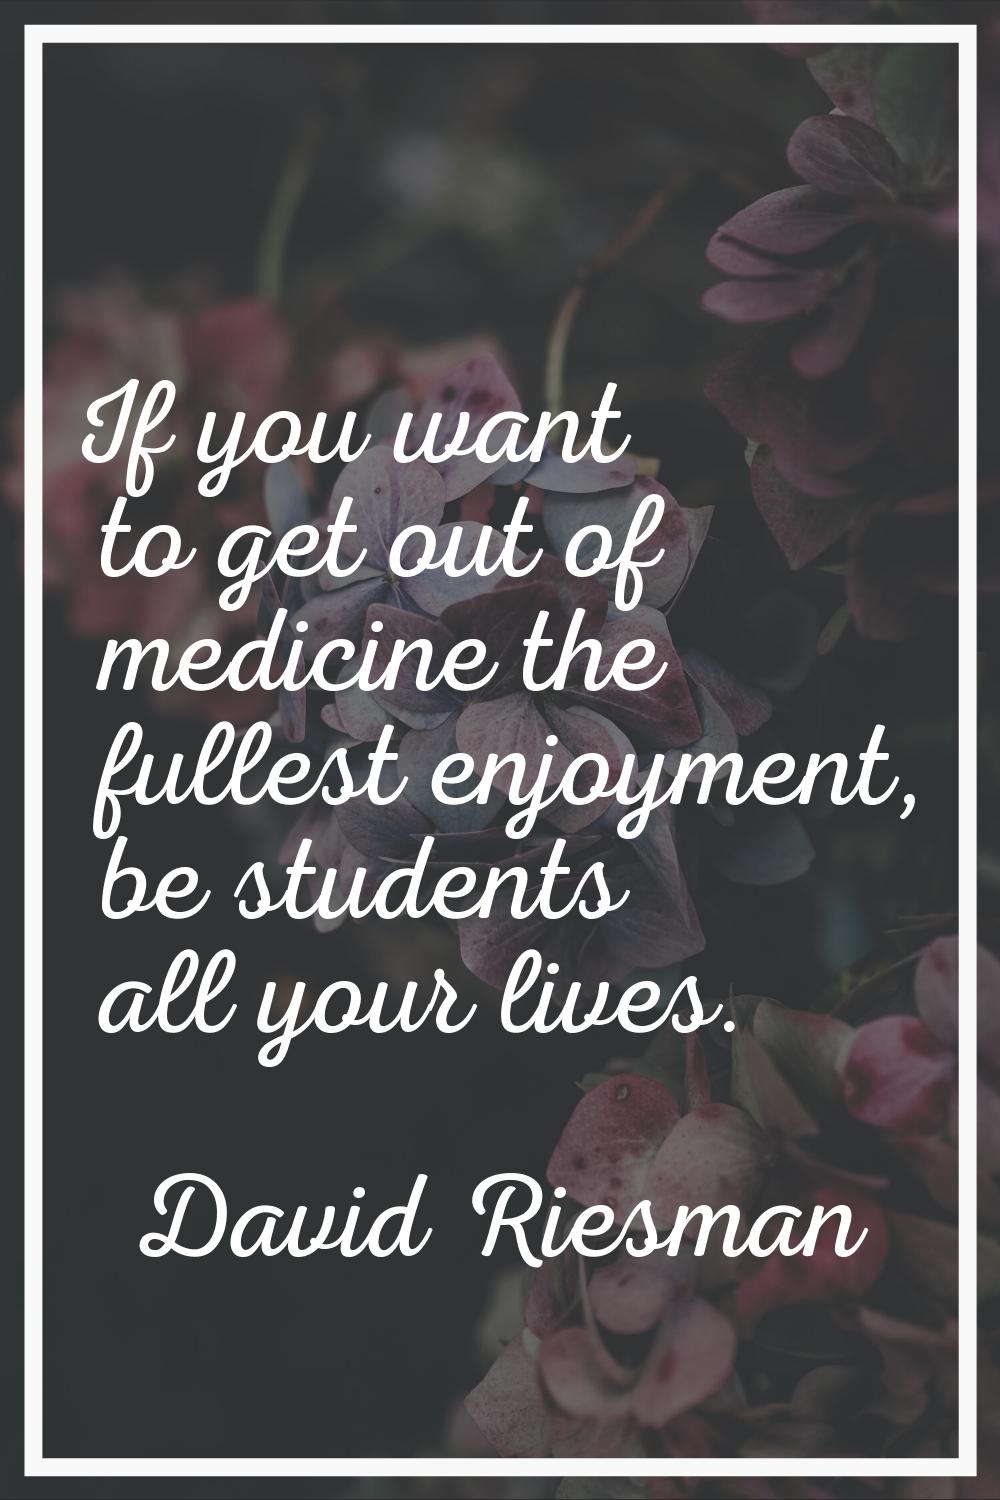 If you want to get out of medicine the fullest enjoyment, be students all your lives.